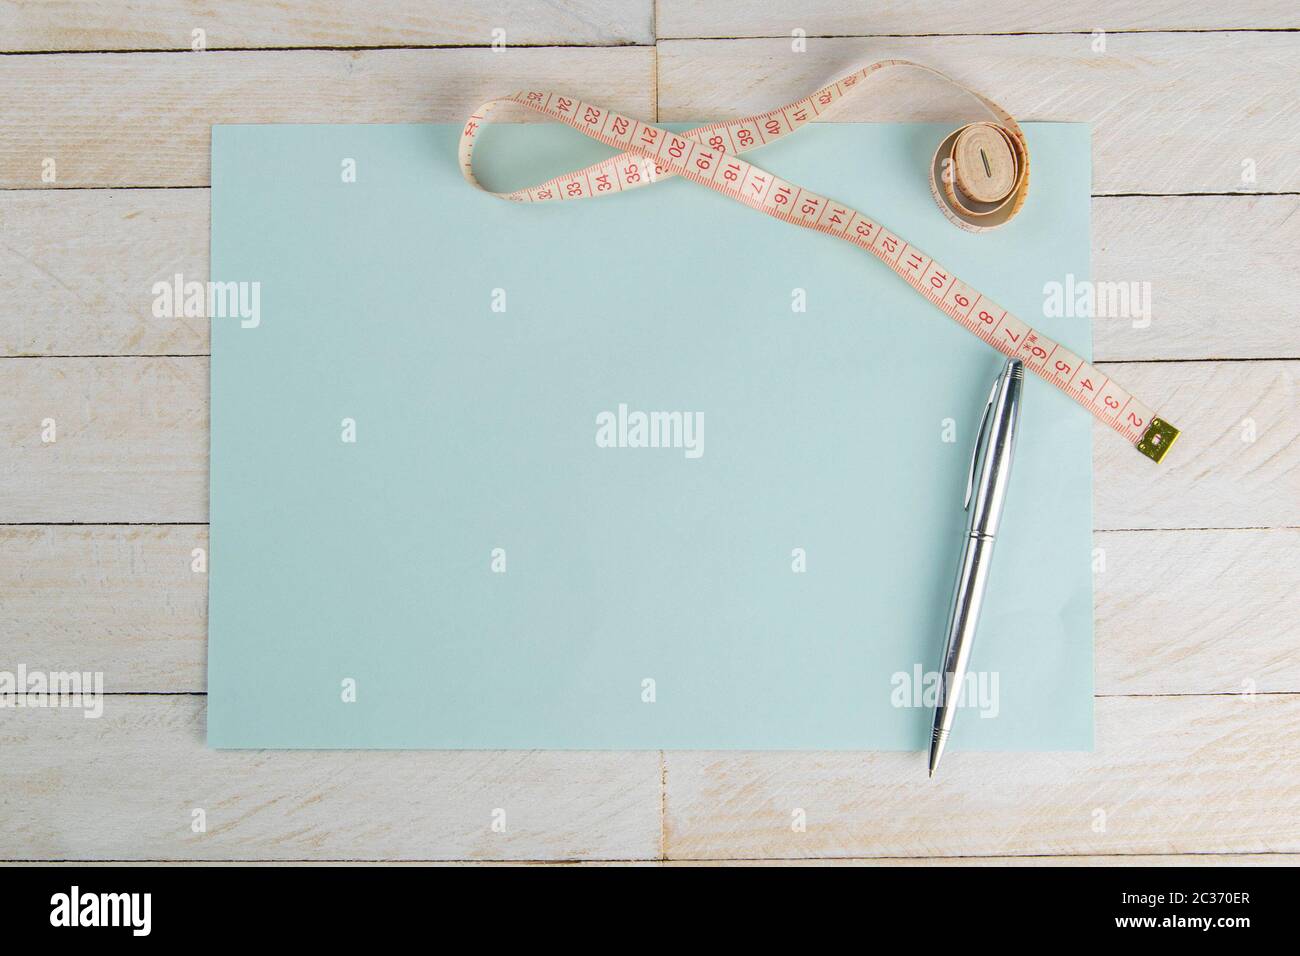 https://c8.alamy.com/comp/2C370ER/blank-open-blue-paper-with-centimeter-tape-on-white-wooden-table-with-space-for-text-or-business-food-concept-concept-sport-diet-fitness-healthy-e-2C370ER.jpg